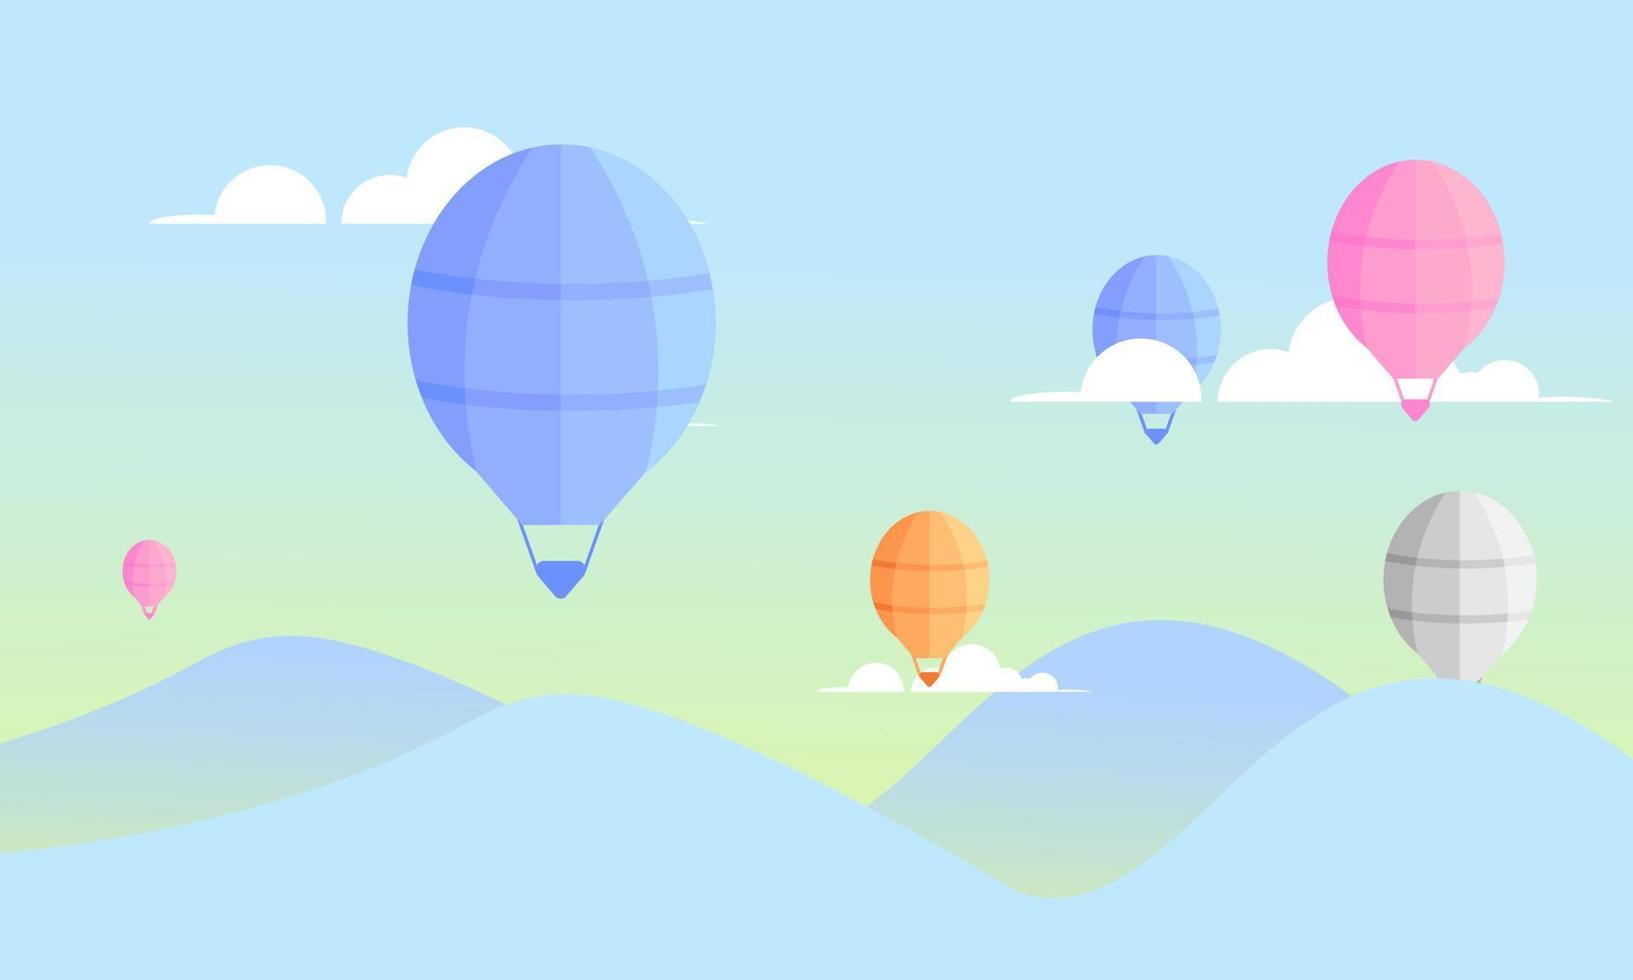 vector illustration of mountain scenery with energetic hot air balloon holiday weekends with bright pastel colors